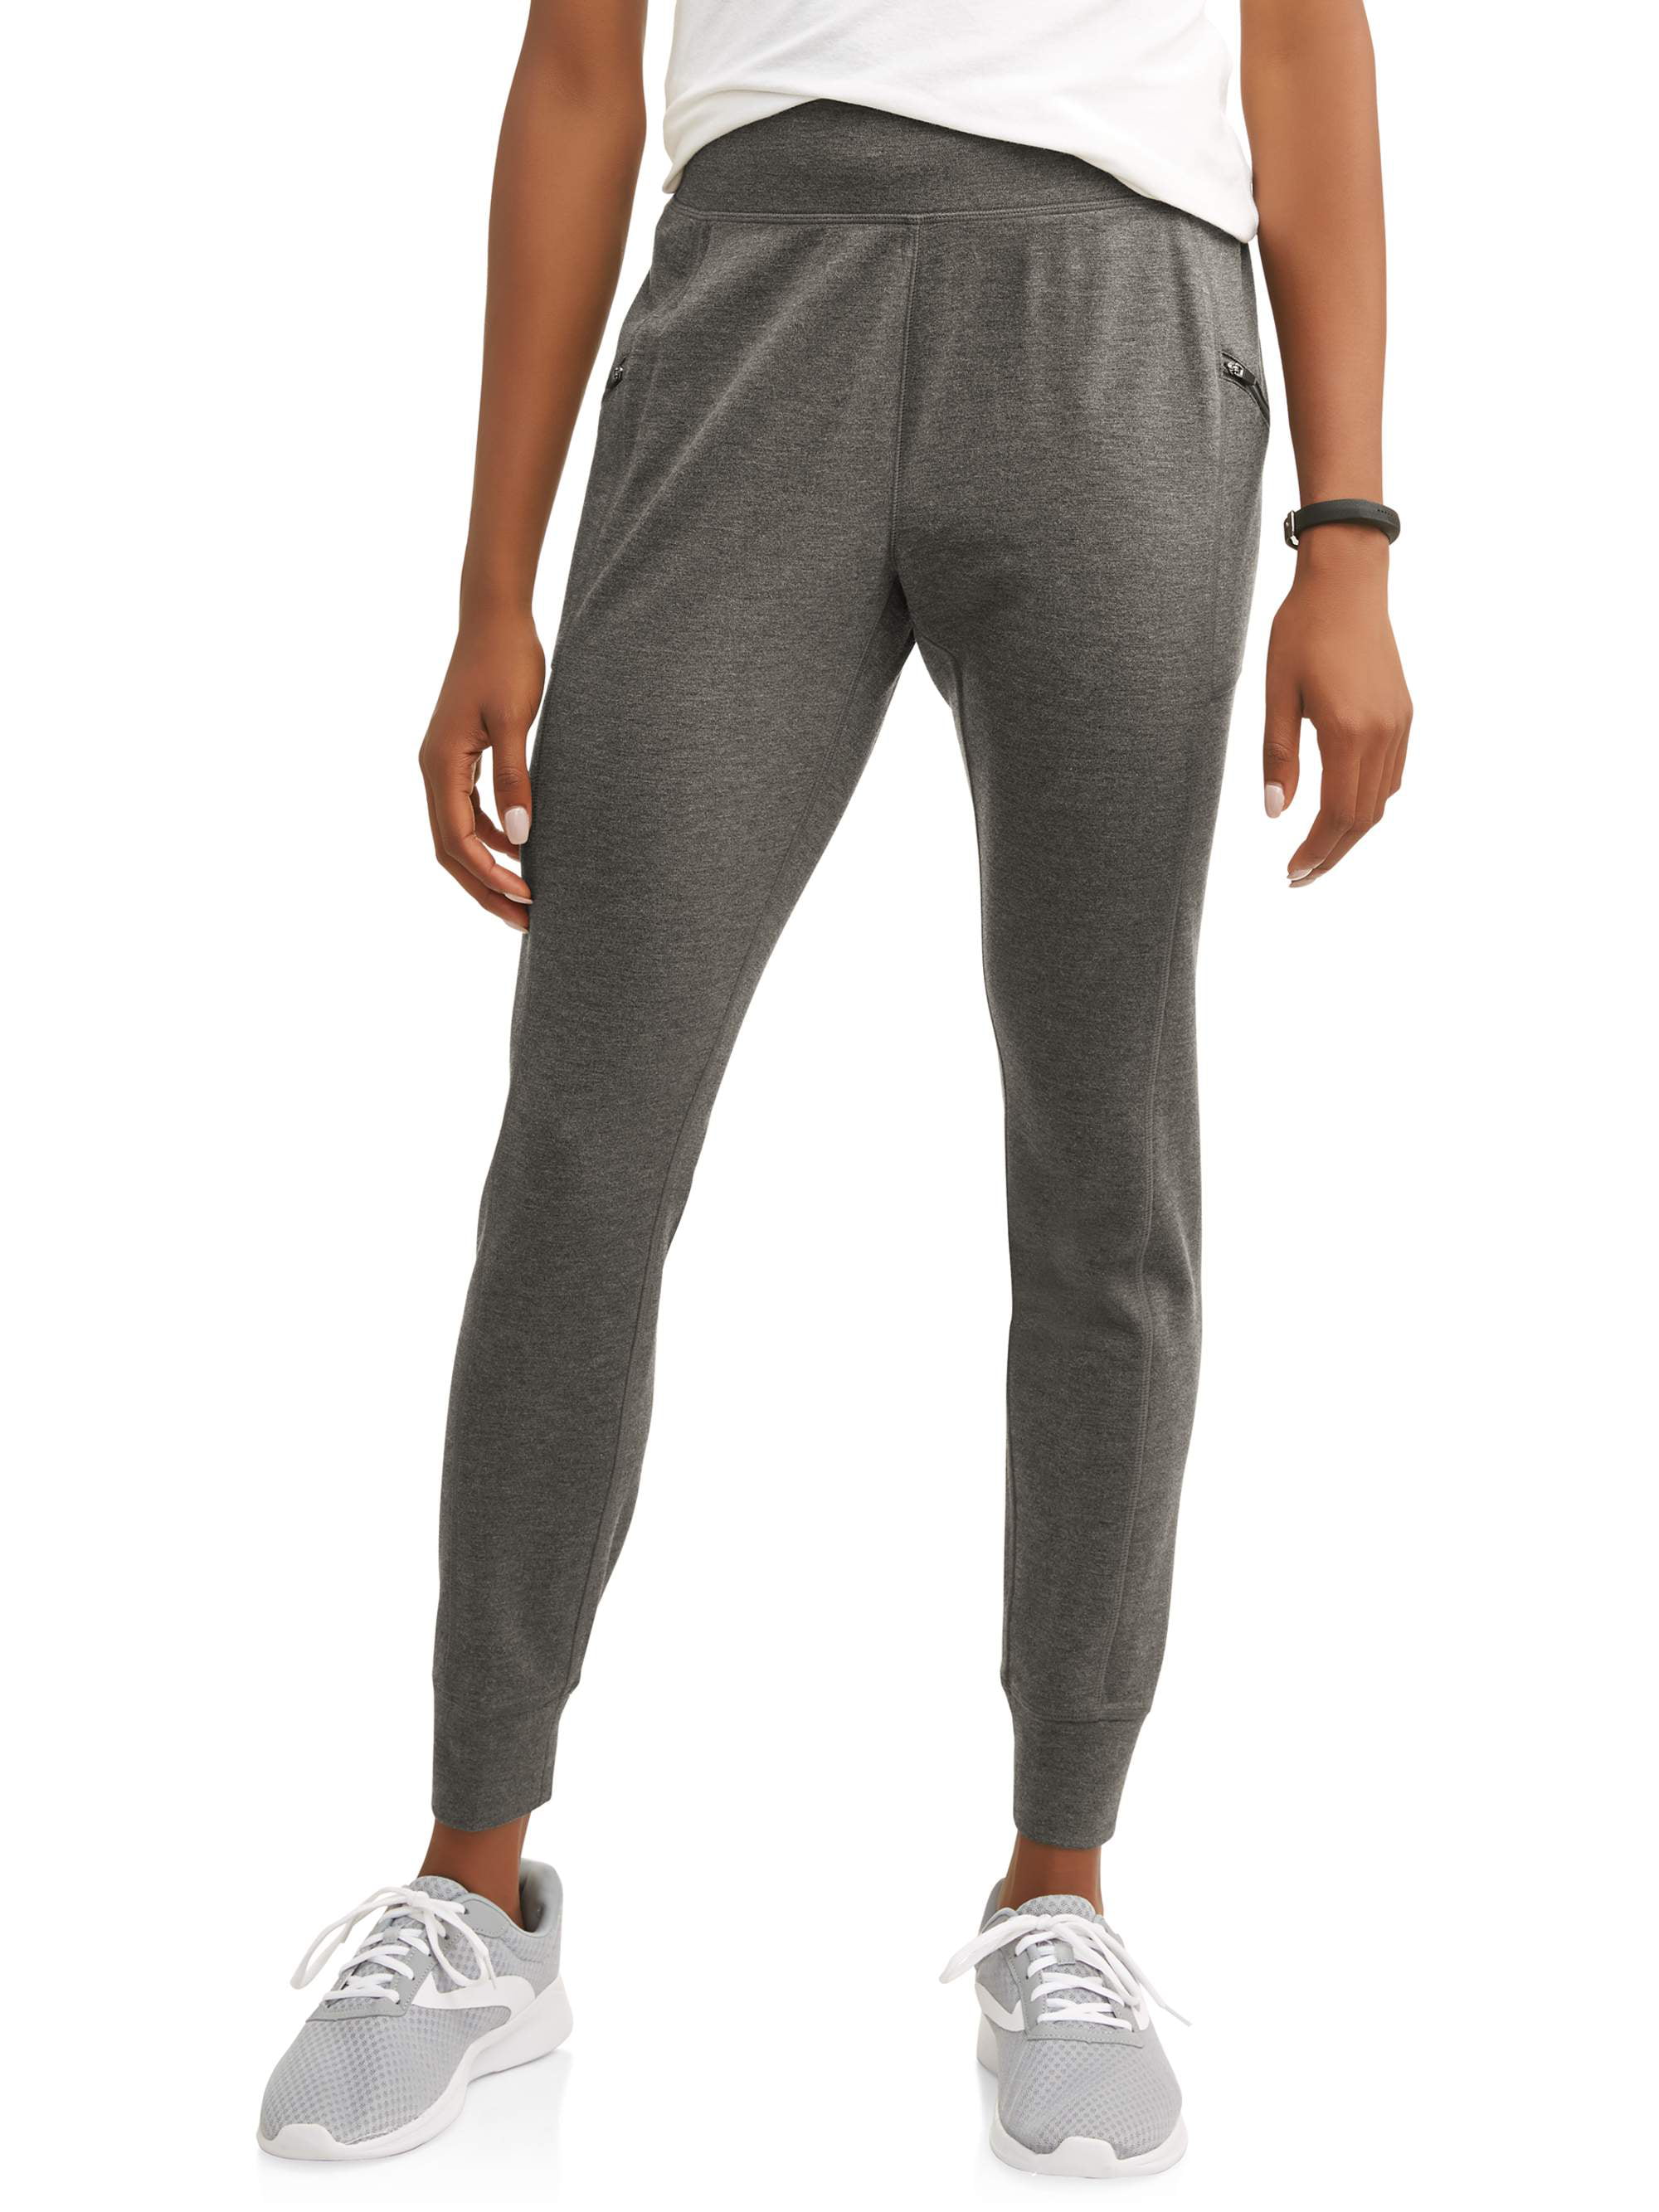 Athletic Works Women's Athleisure Double Knit Slim Jogger Pant 